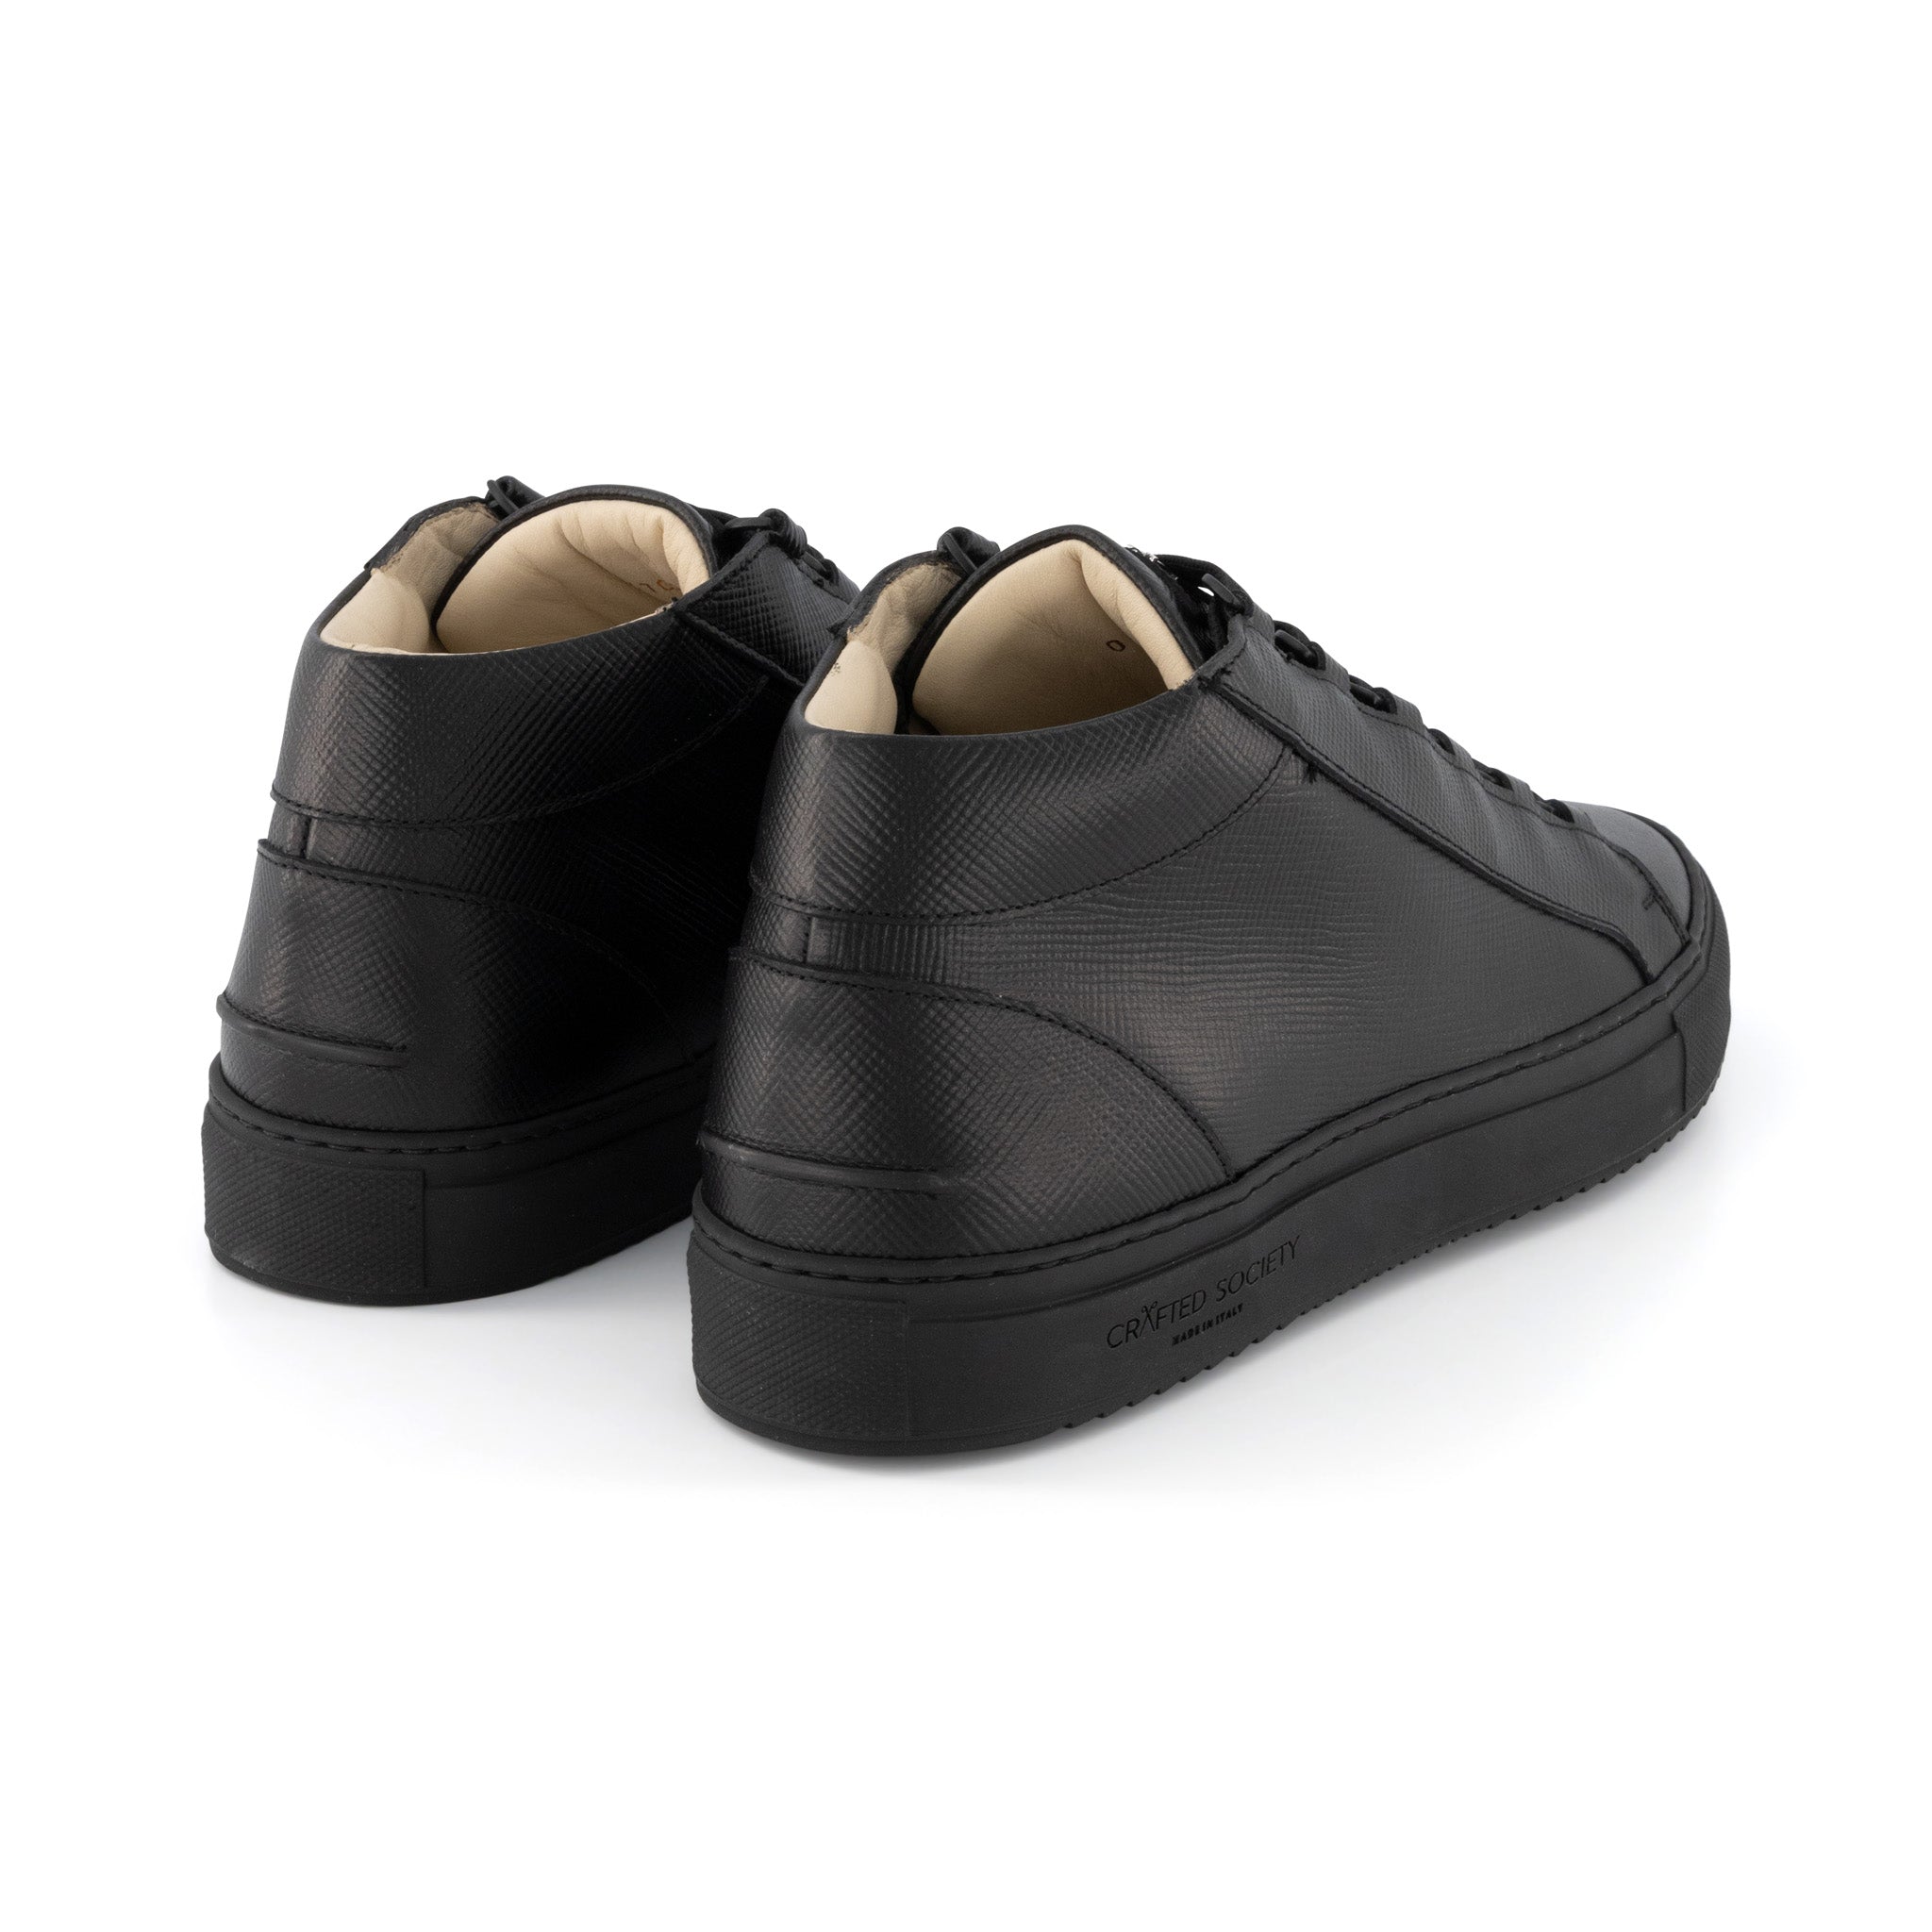 Rico Mid Sneaker | Black Saffiano Leather | Black Outsole | Made in Italy